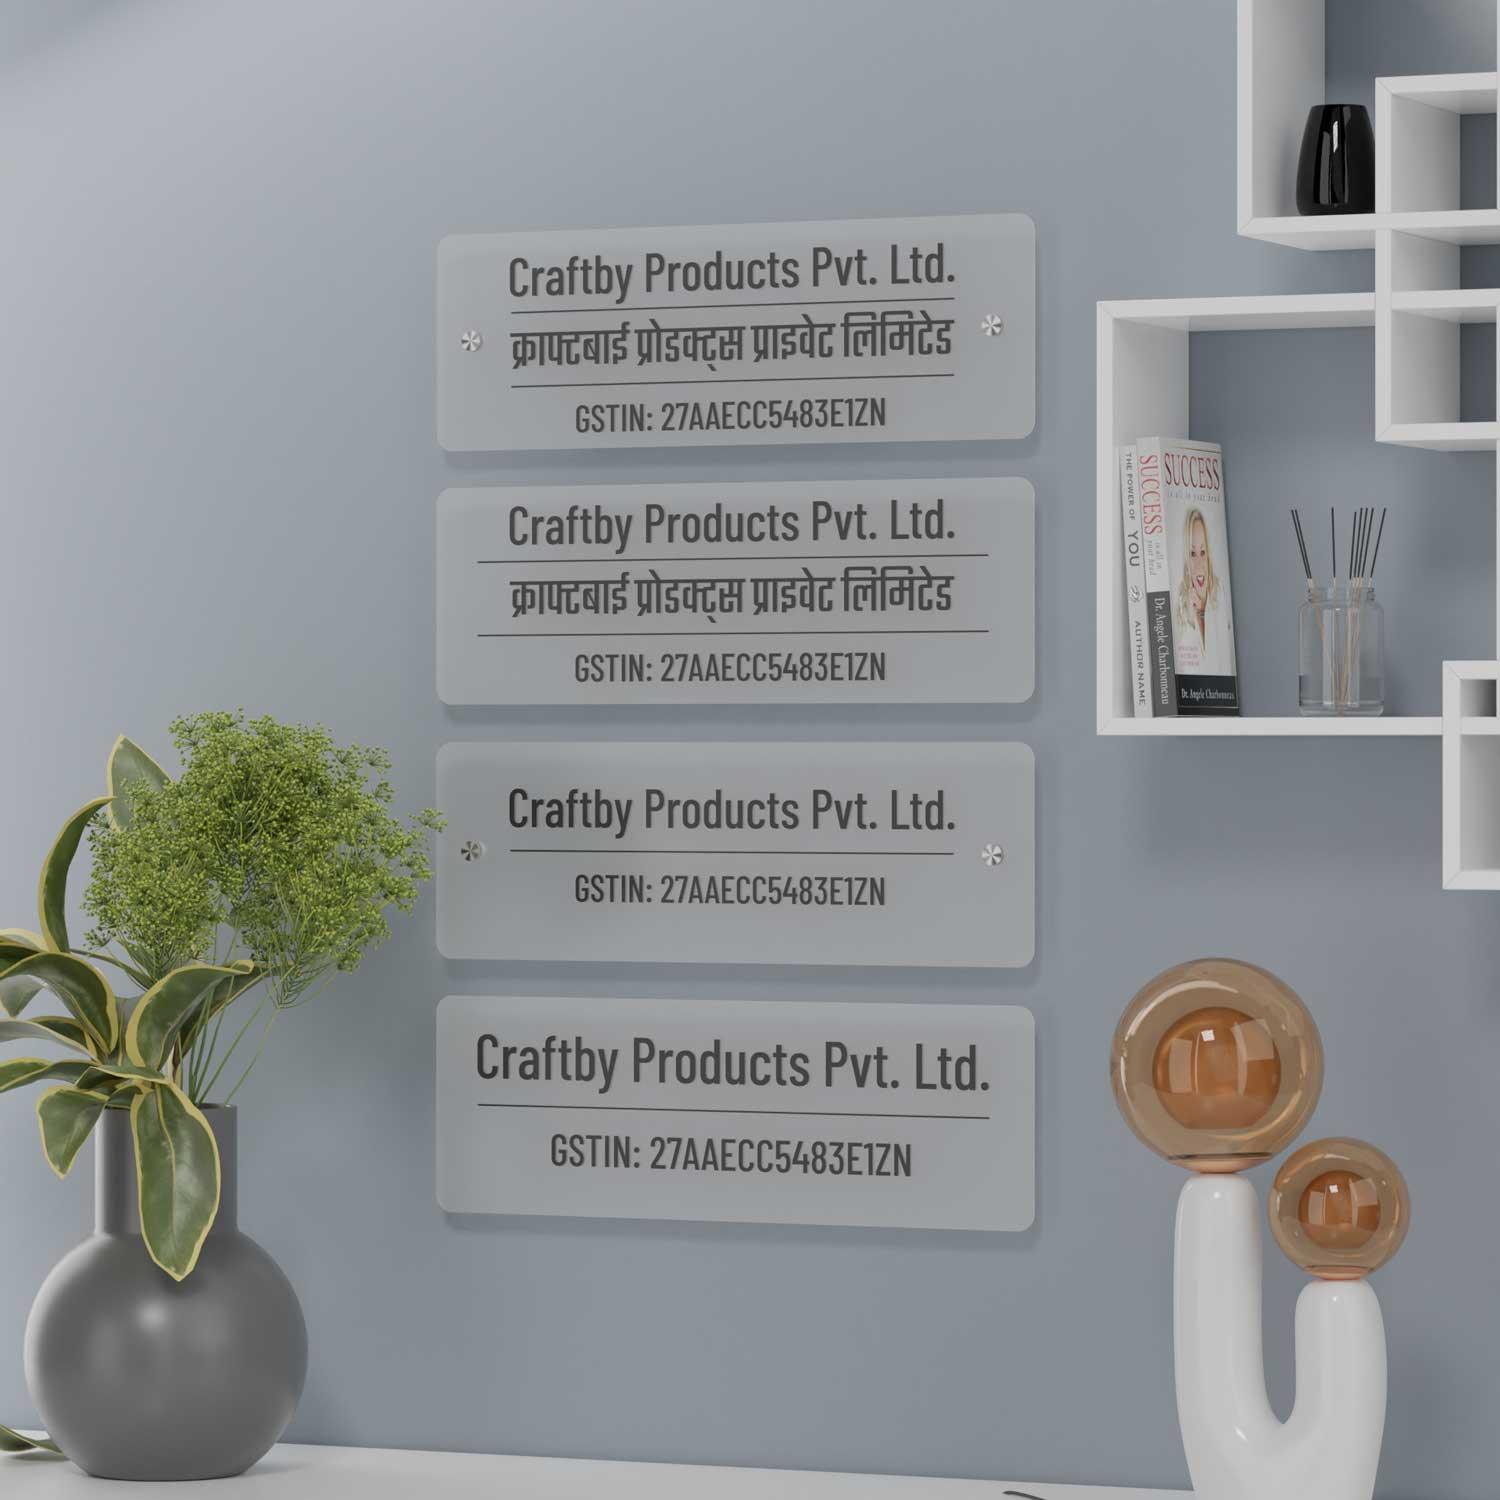 Barlow (Frosted White) - Contemporary Office GST Name Board - Housenama